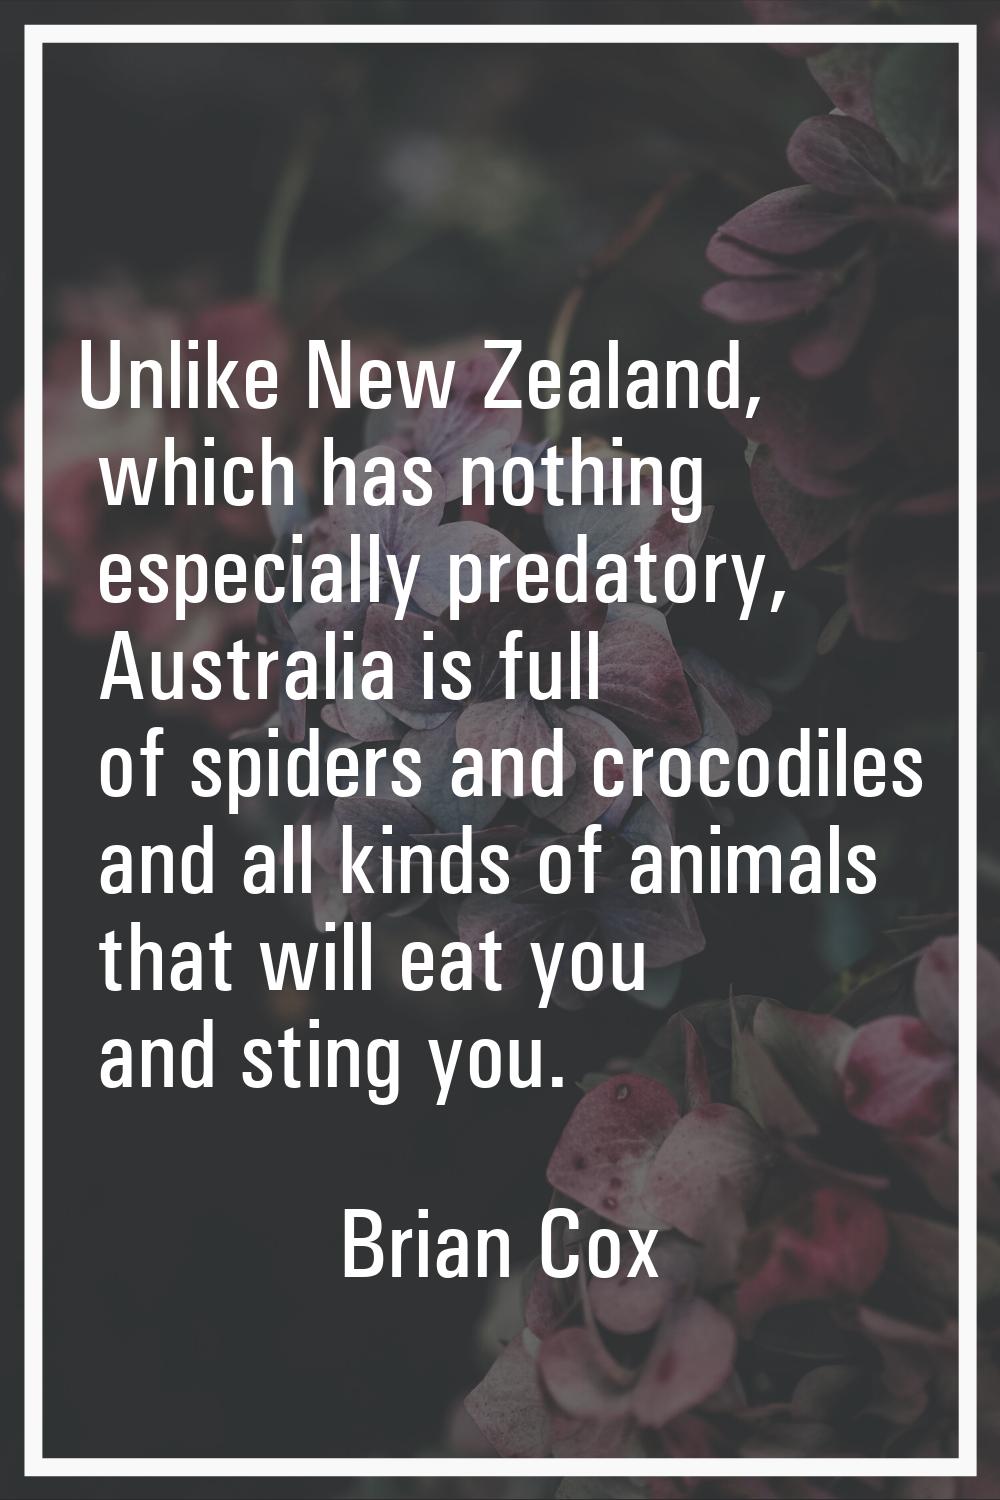 Unlike New Zealand, which has nothing especially predatory, Australia is full of spiders and crocod